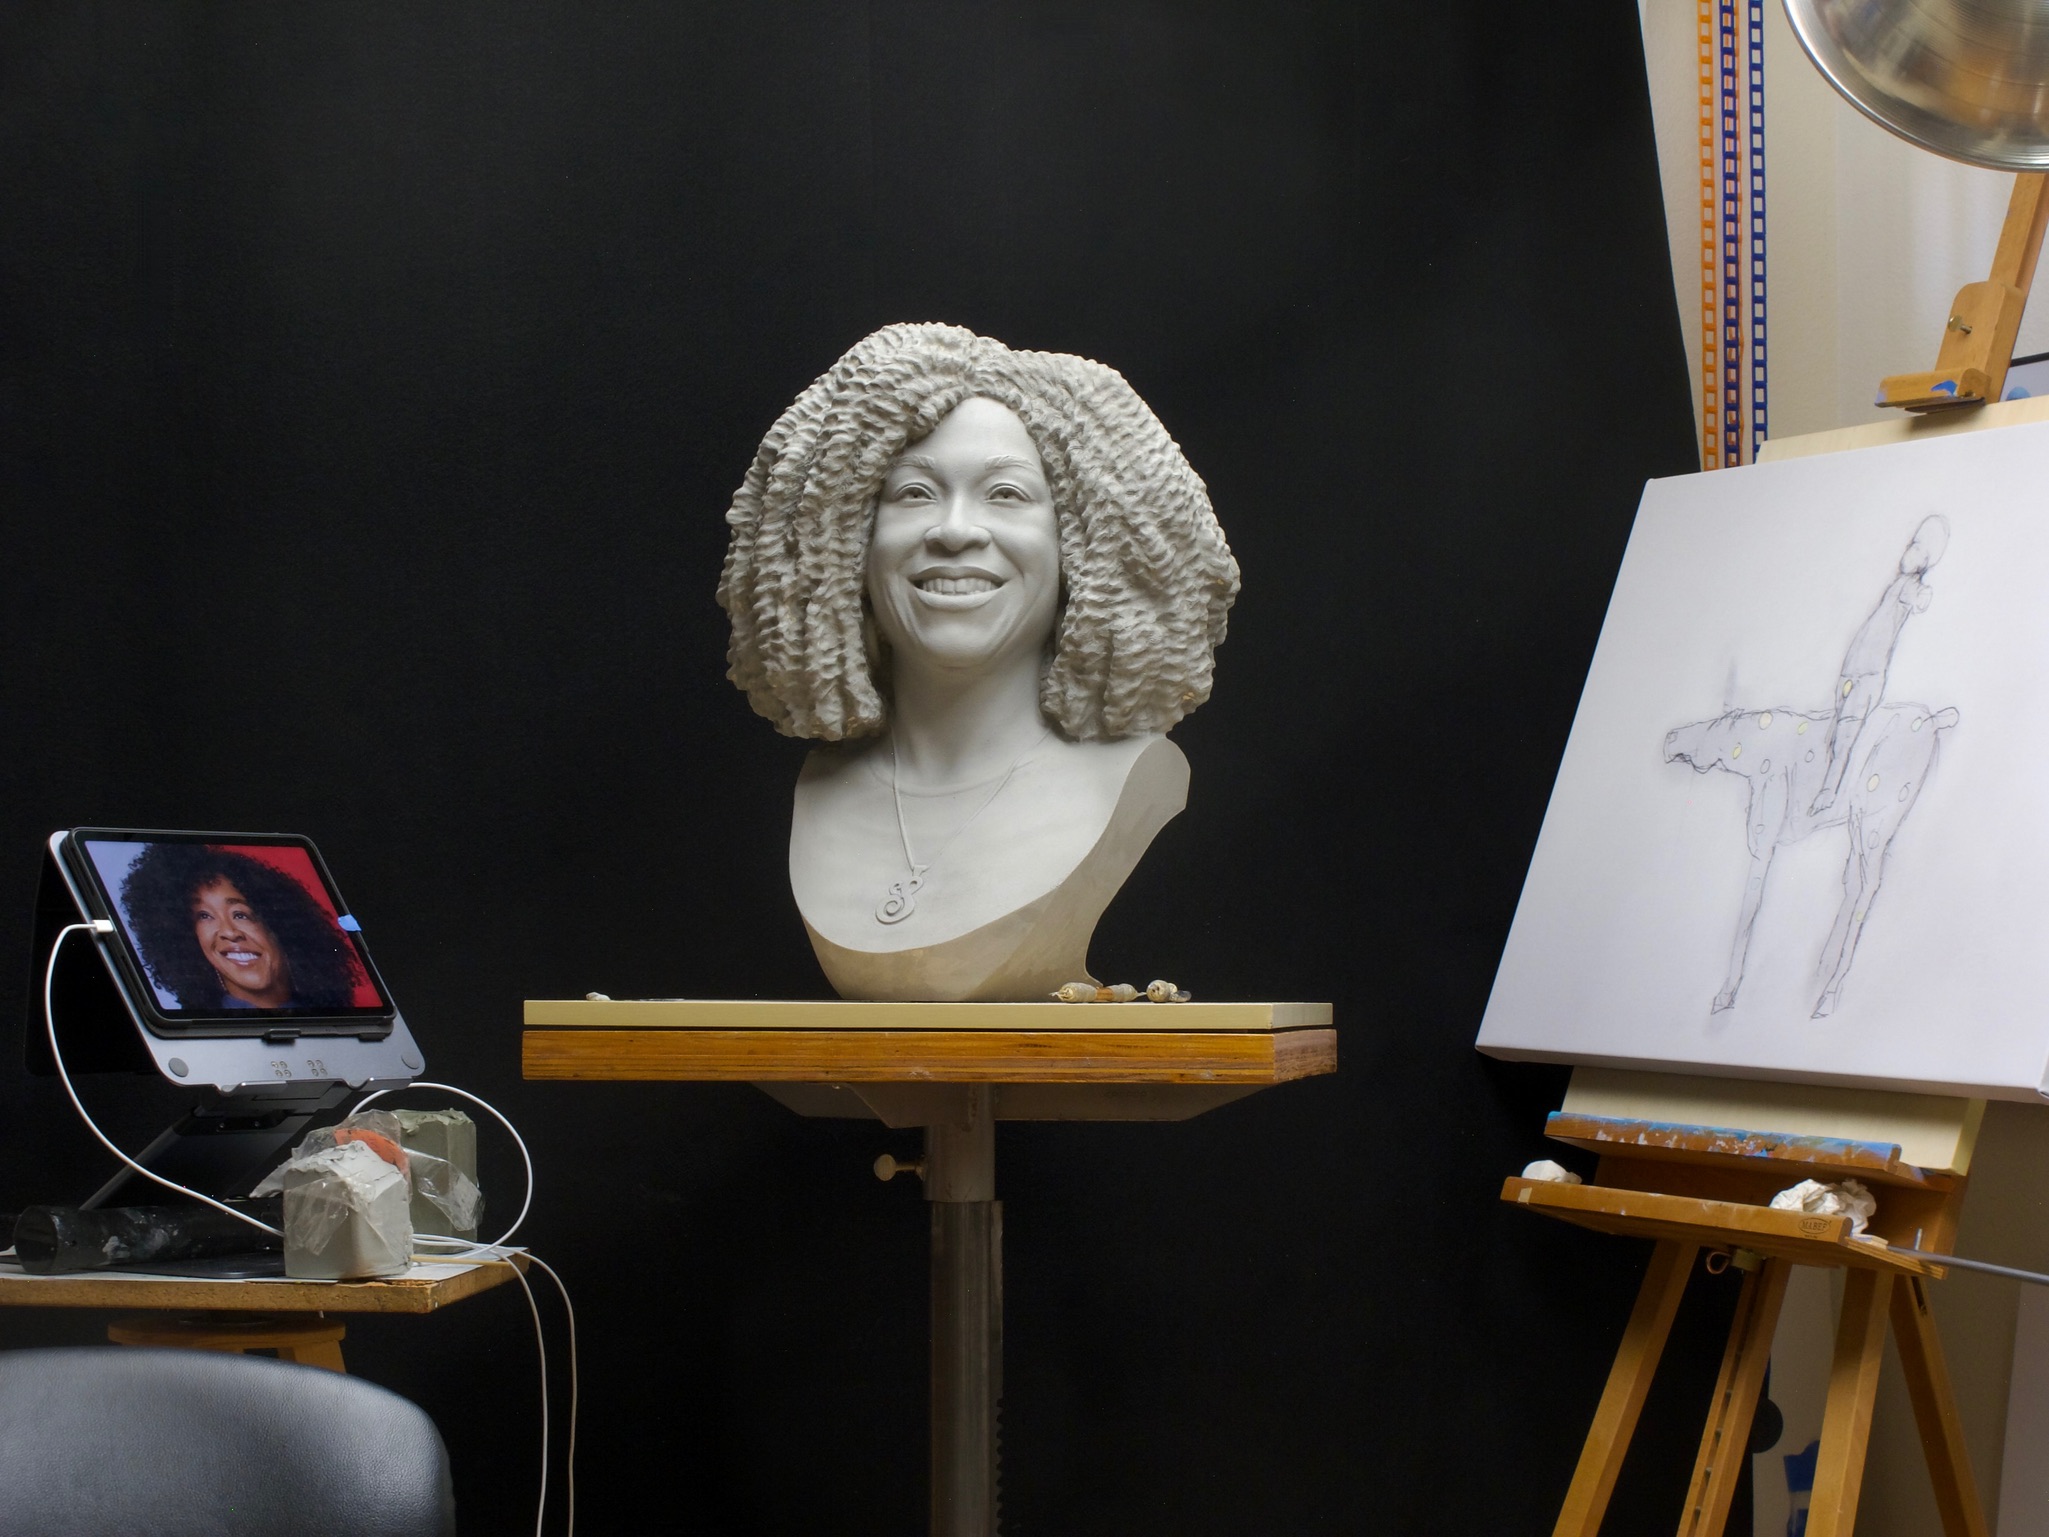 Shonda Rhimes bust being sculpted by Richard becker for television academy